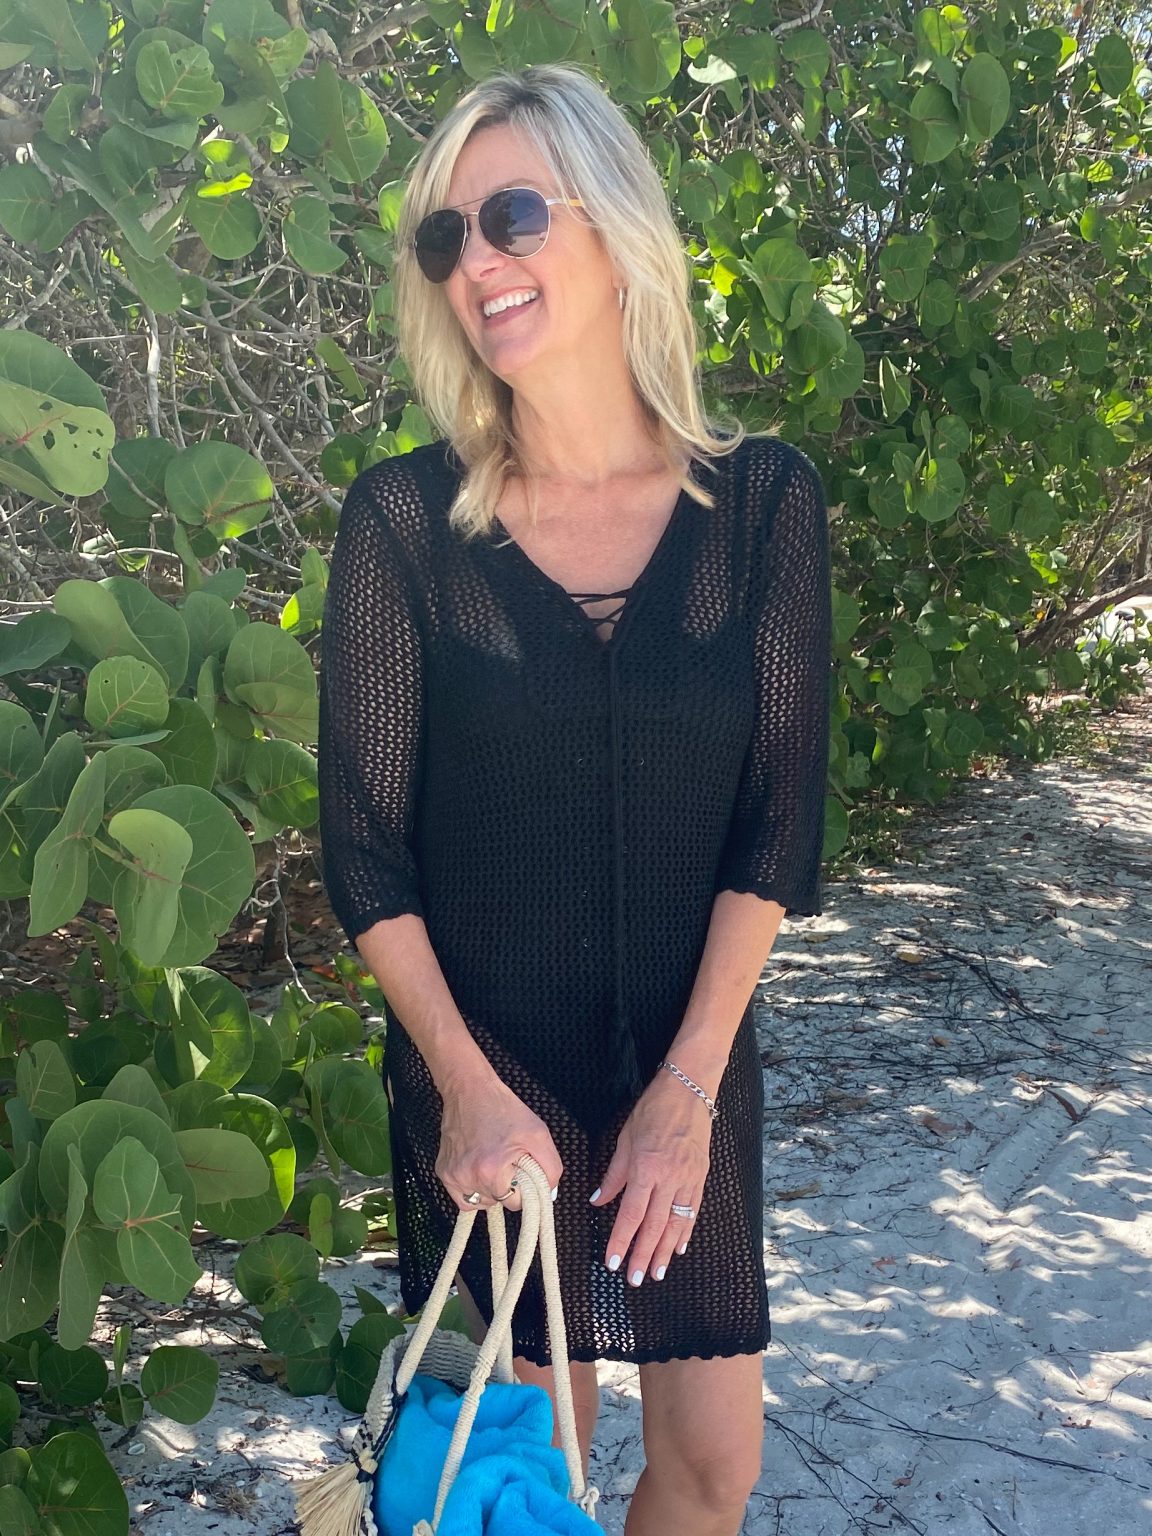 The Best Amazon Swimsuit Cover Ups Under $30 - Life on Pineapple Lane